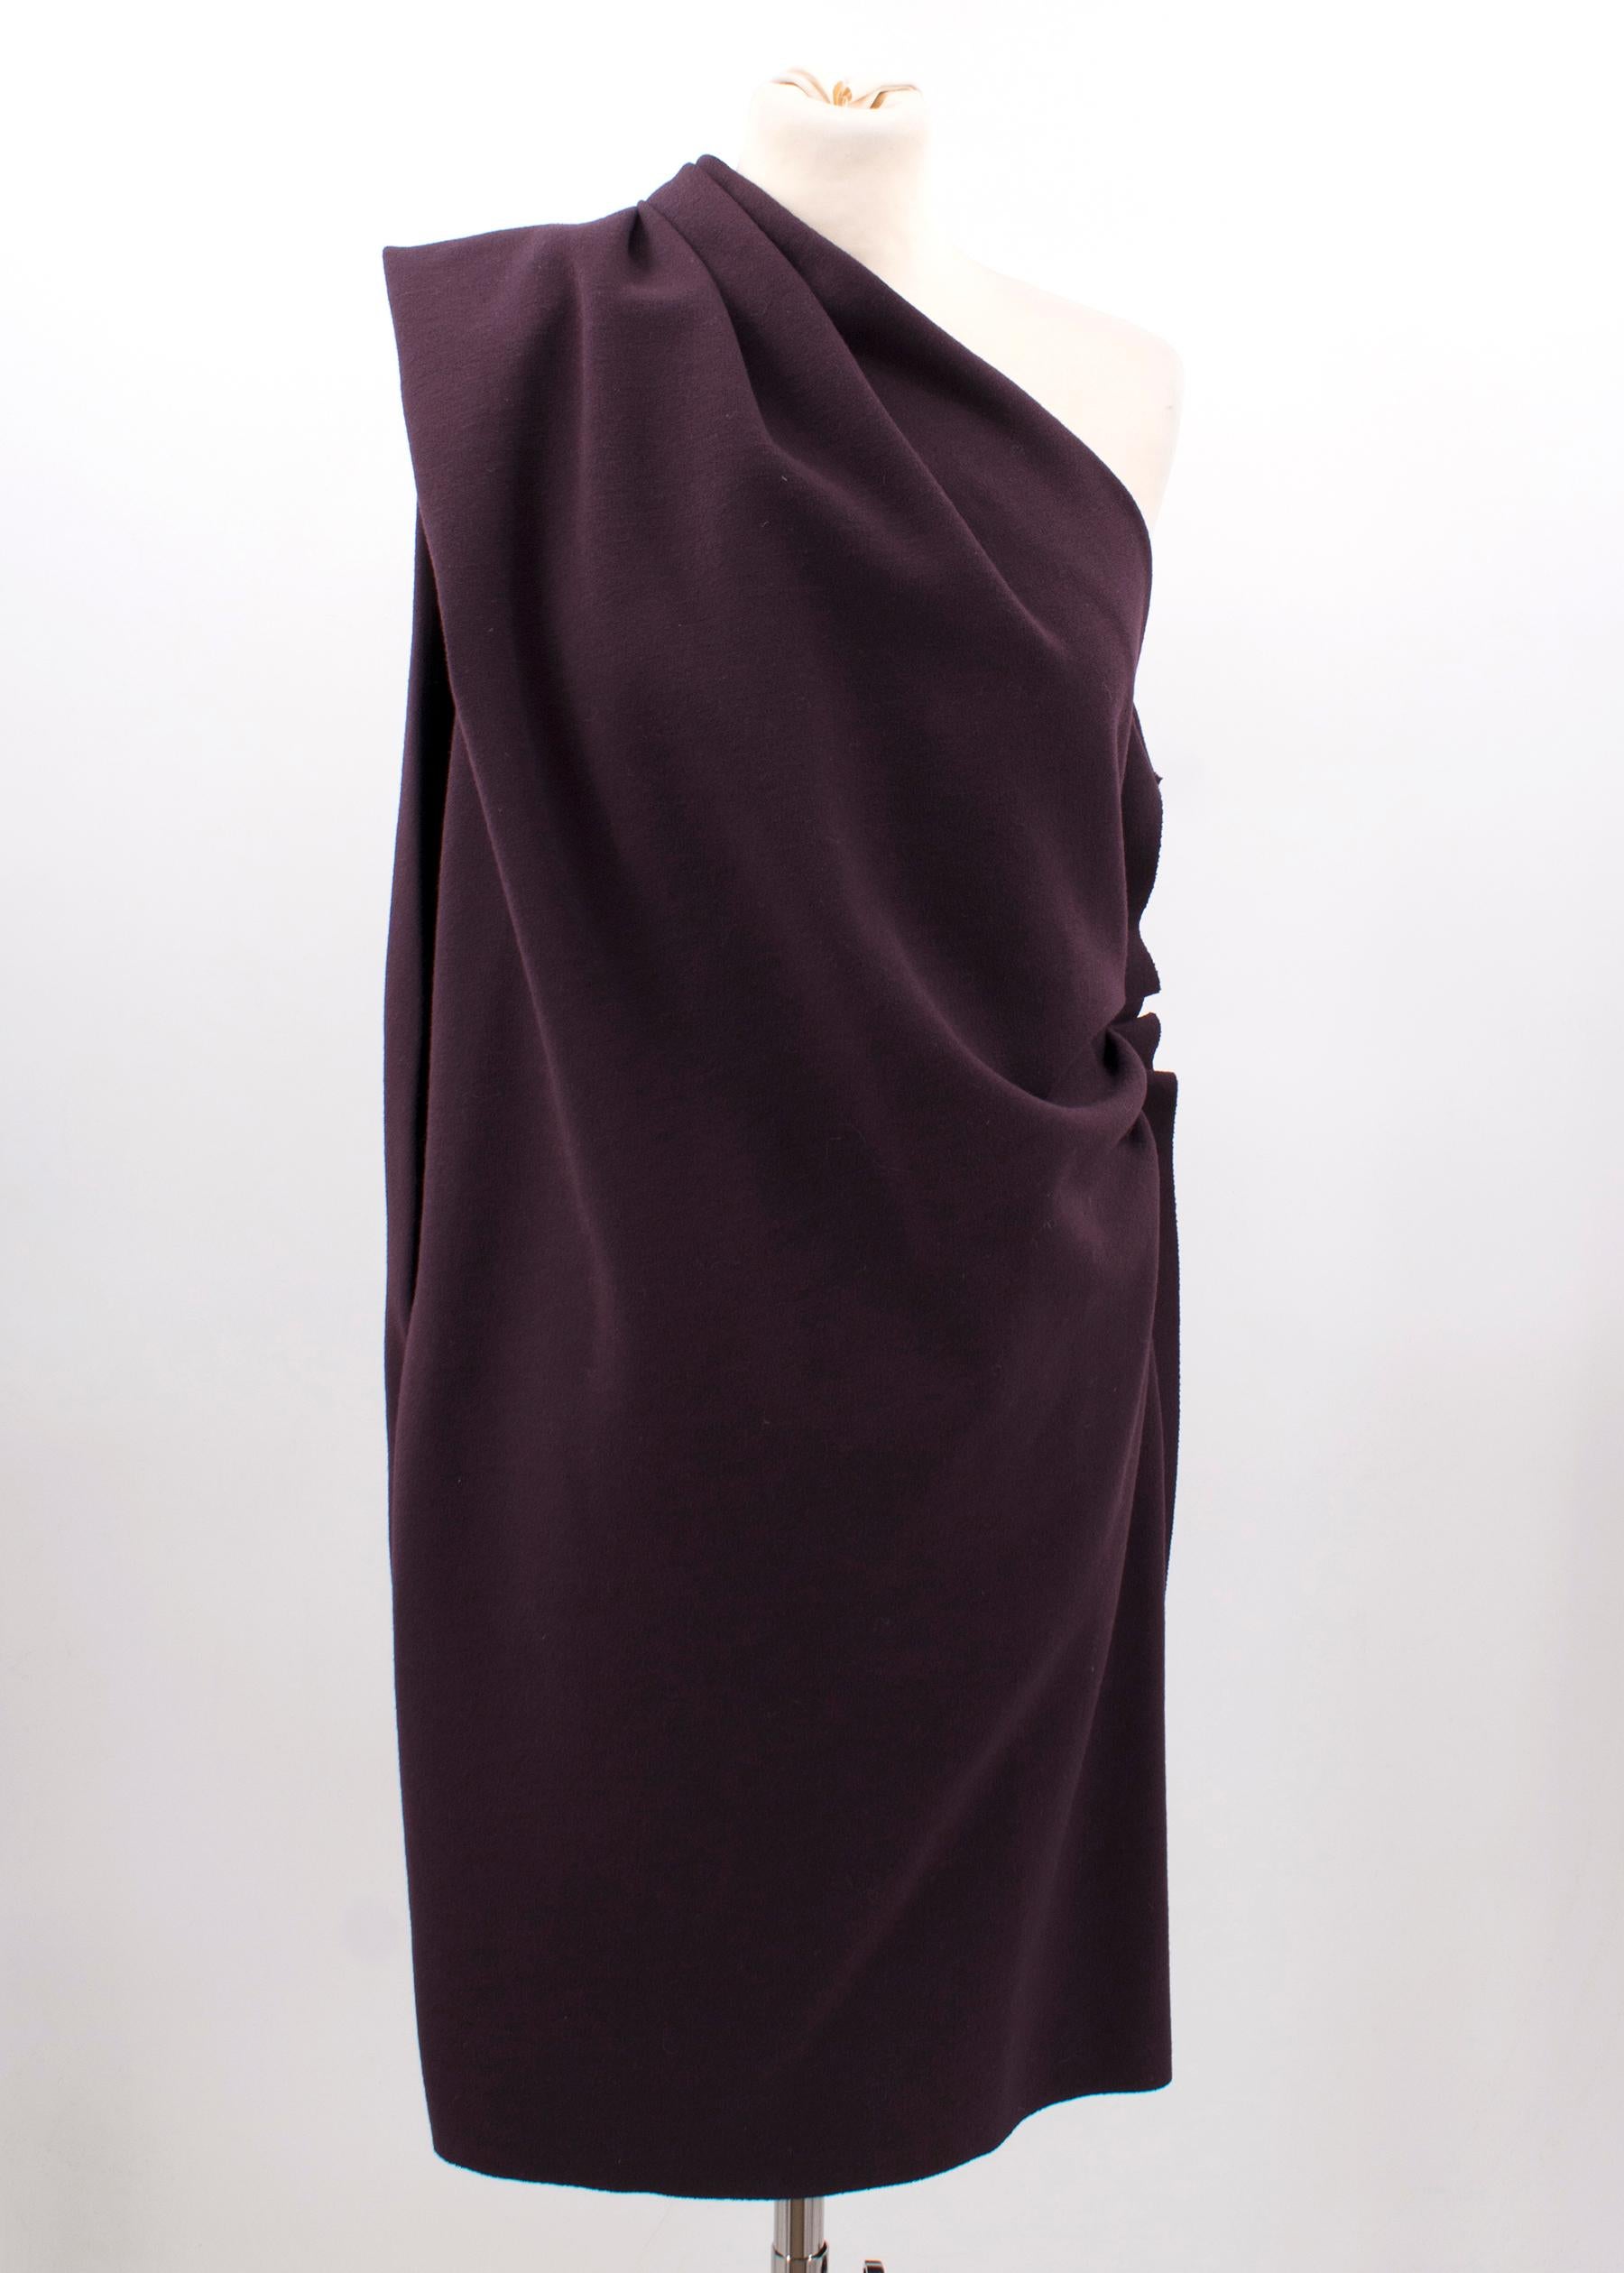 Lanvn purple wool one shoulder dress. 

Heavy weight one- shoulder dress. 
Includes a concealed side zip. 

Fabric: Wool blend. 

Perfect condition: 10/10. Never worn without tags. 

Please note, these items are pre-owned and may show signs of being